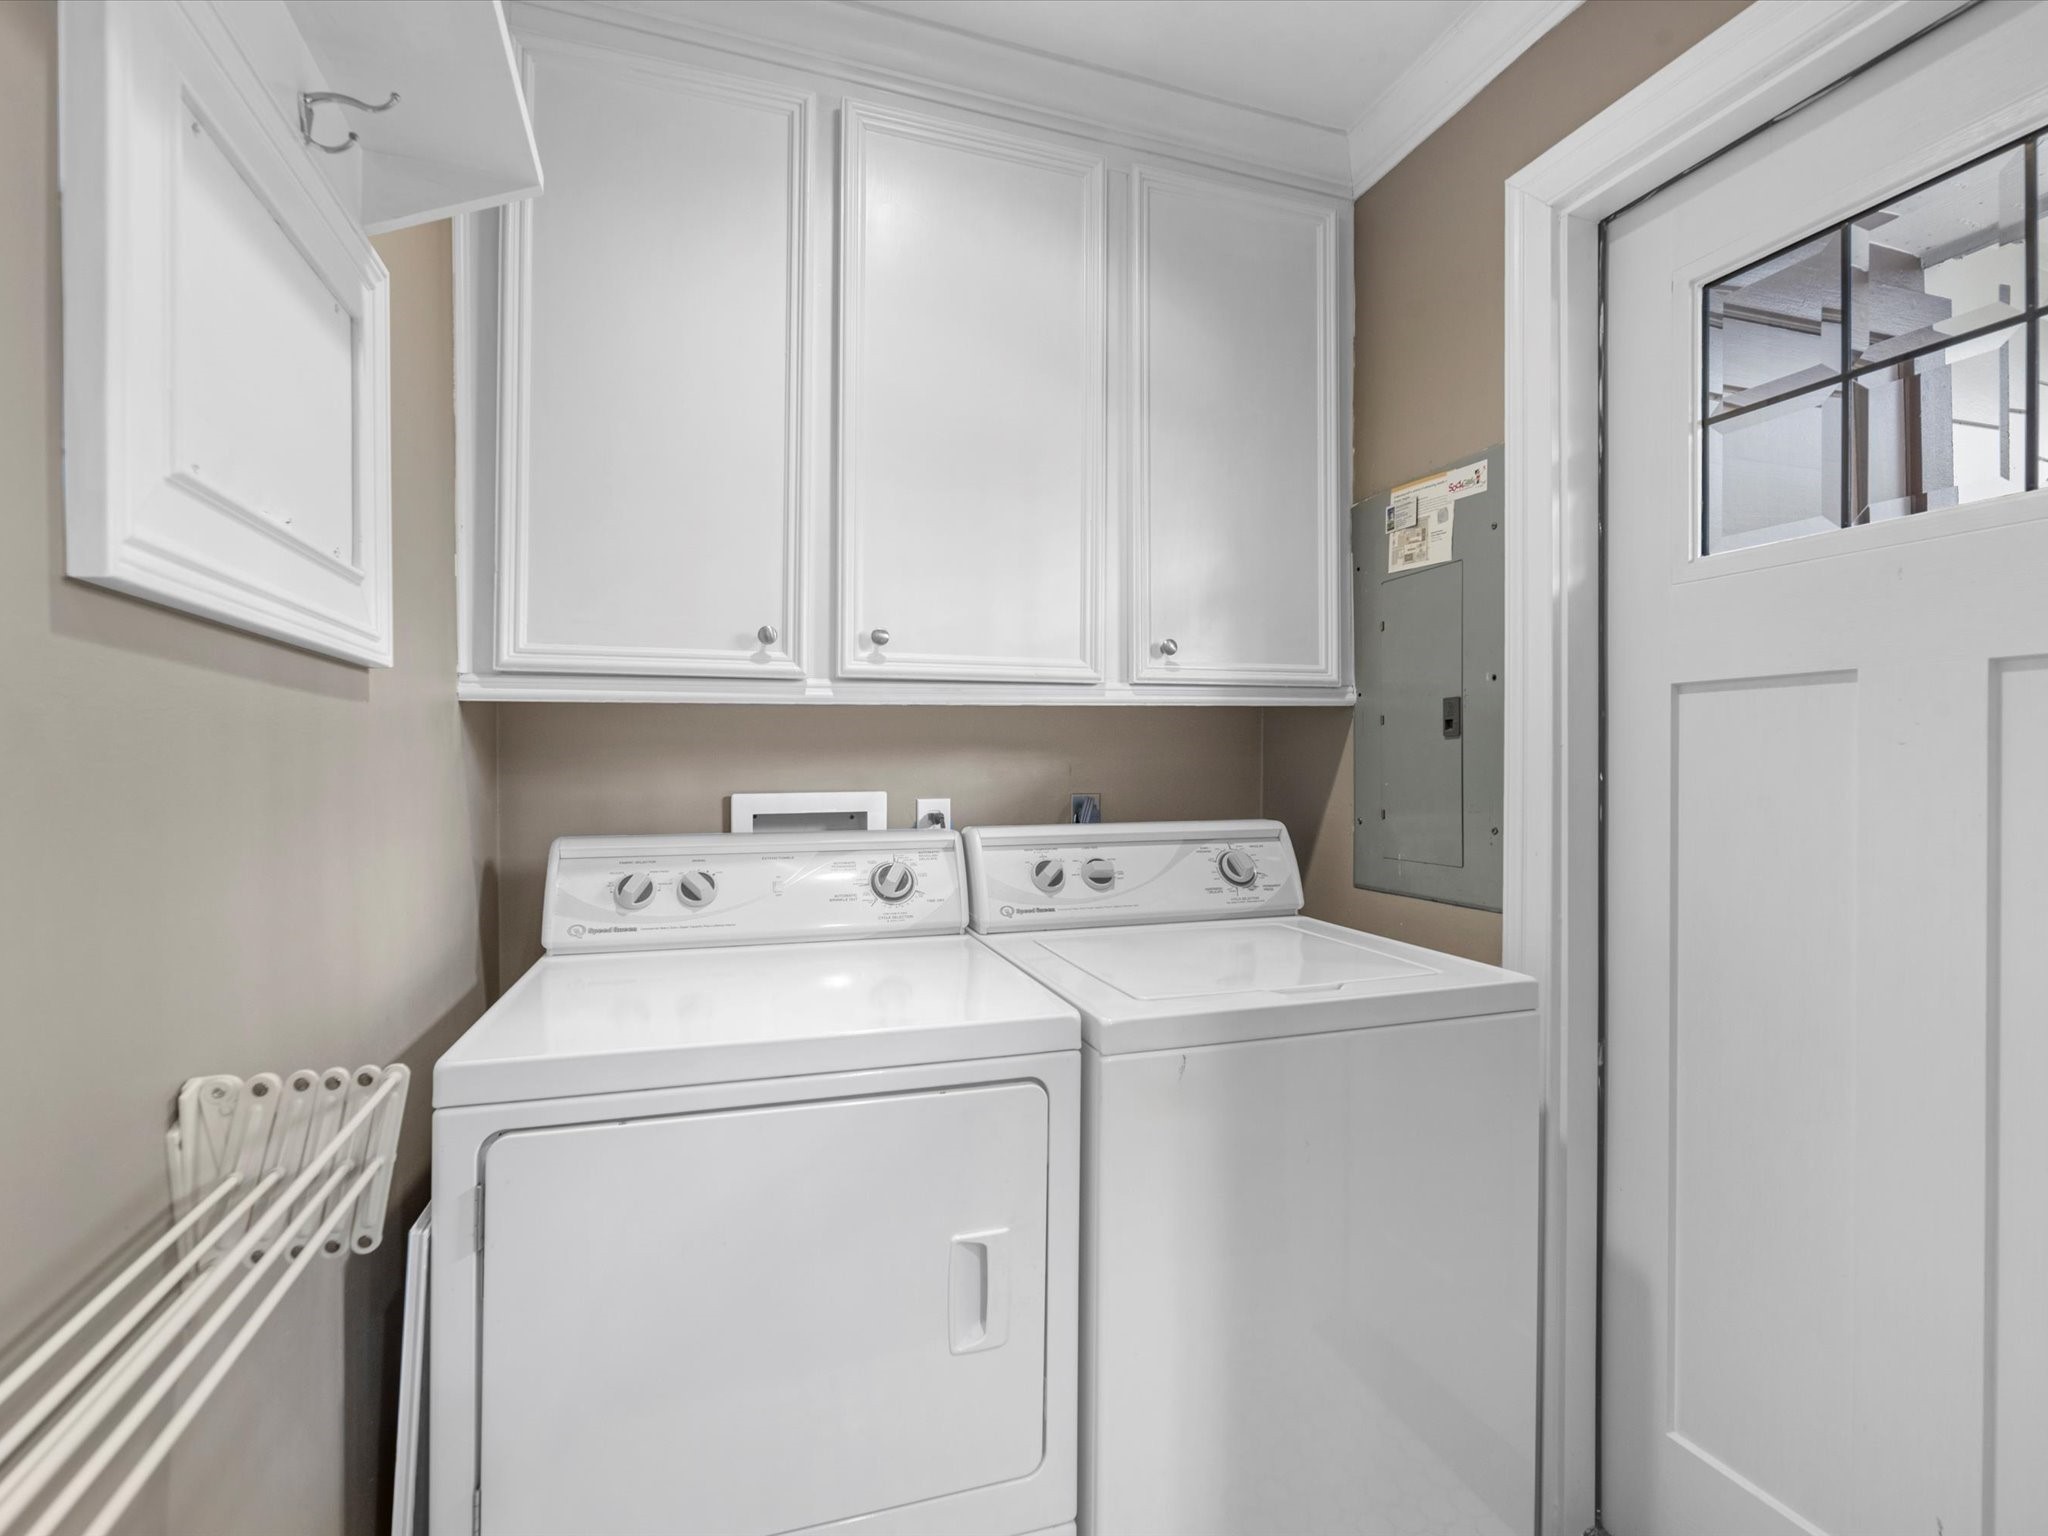 The in-house laundry room has built-in cabinets.